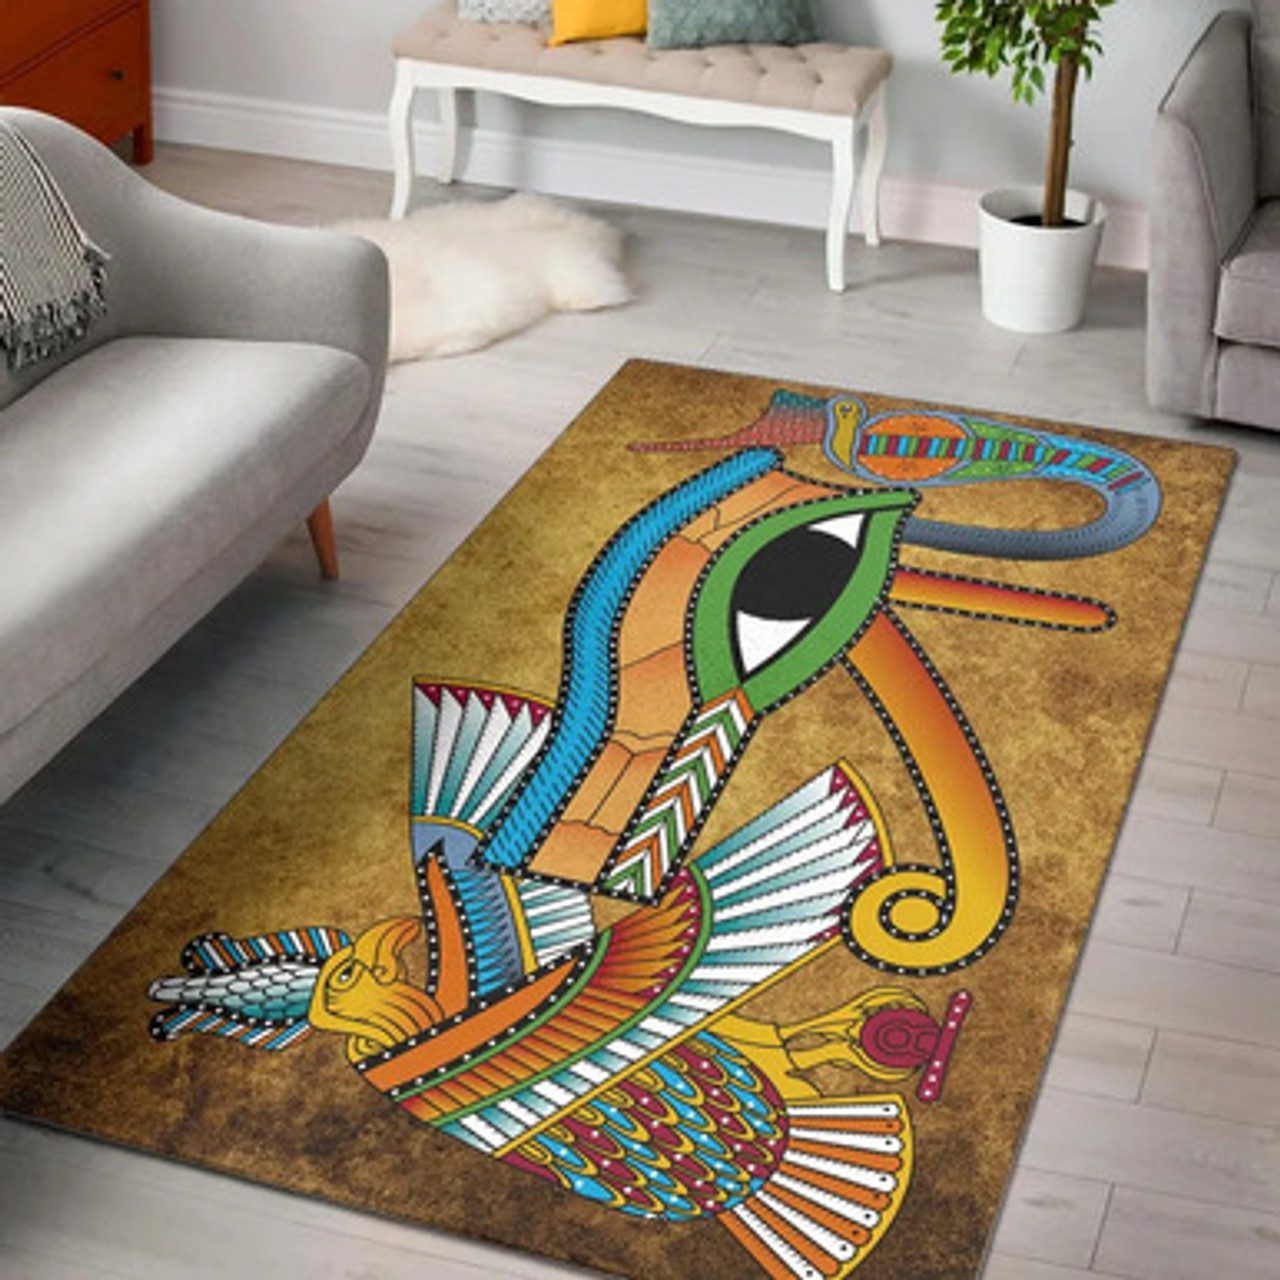 Egyptian Area Rug – African Patterns Egyptian Hieroglyphics and Gods Self Knowledge Area Rug